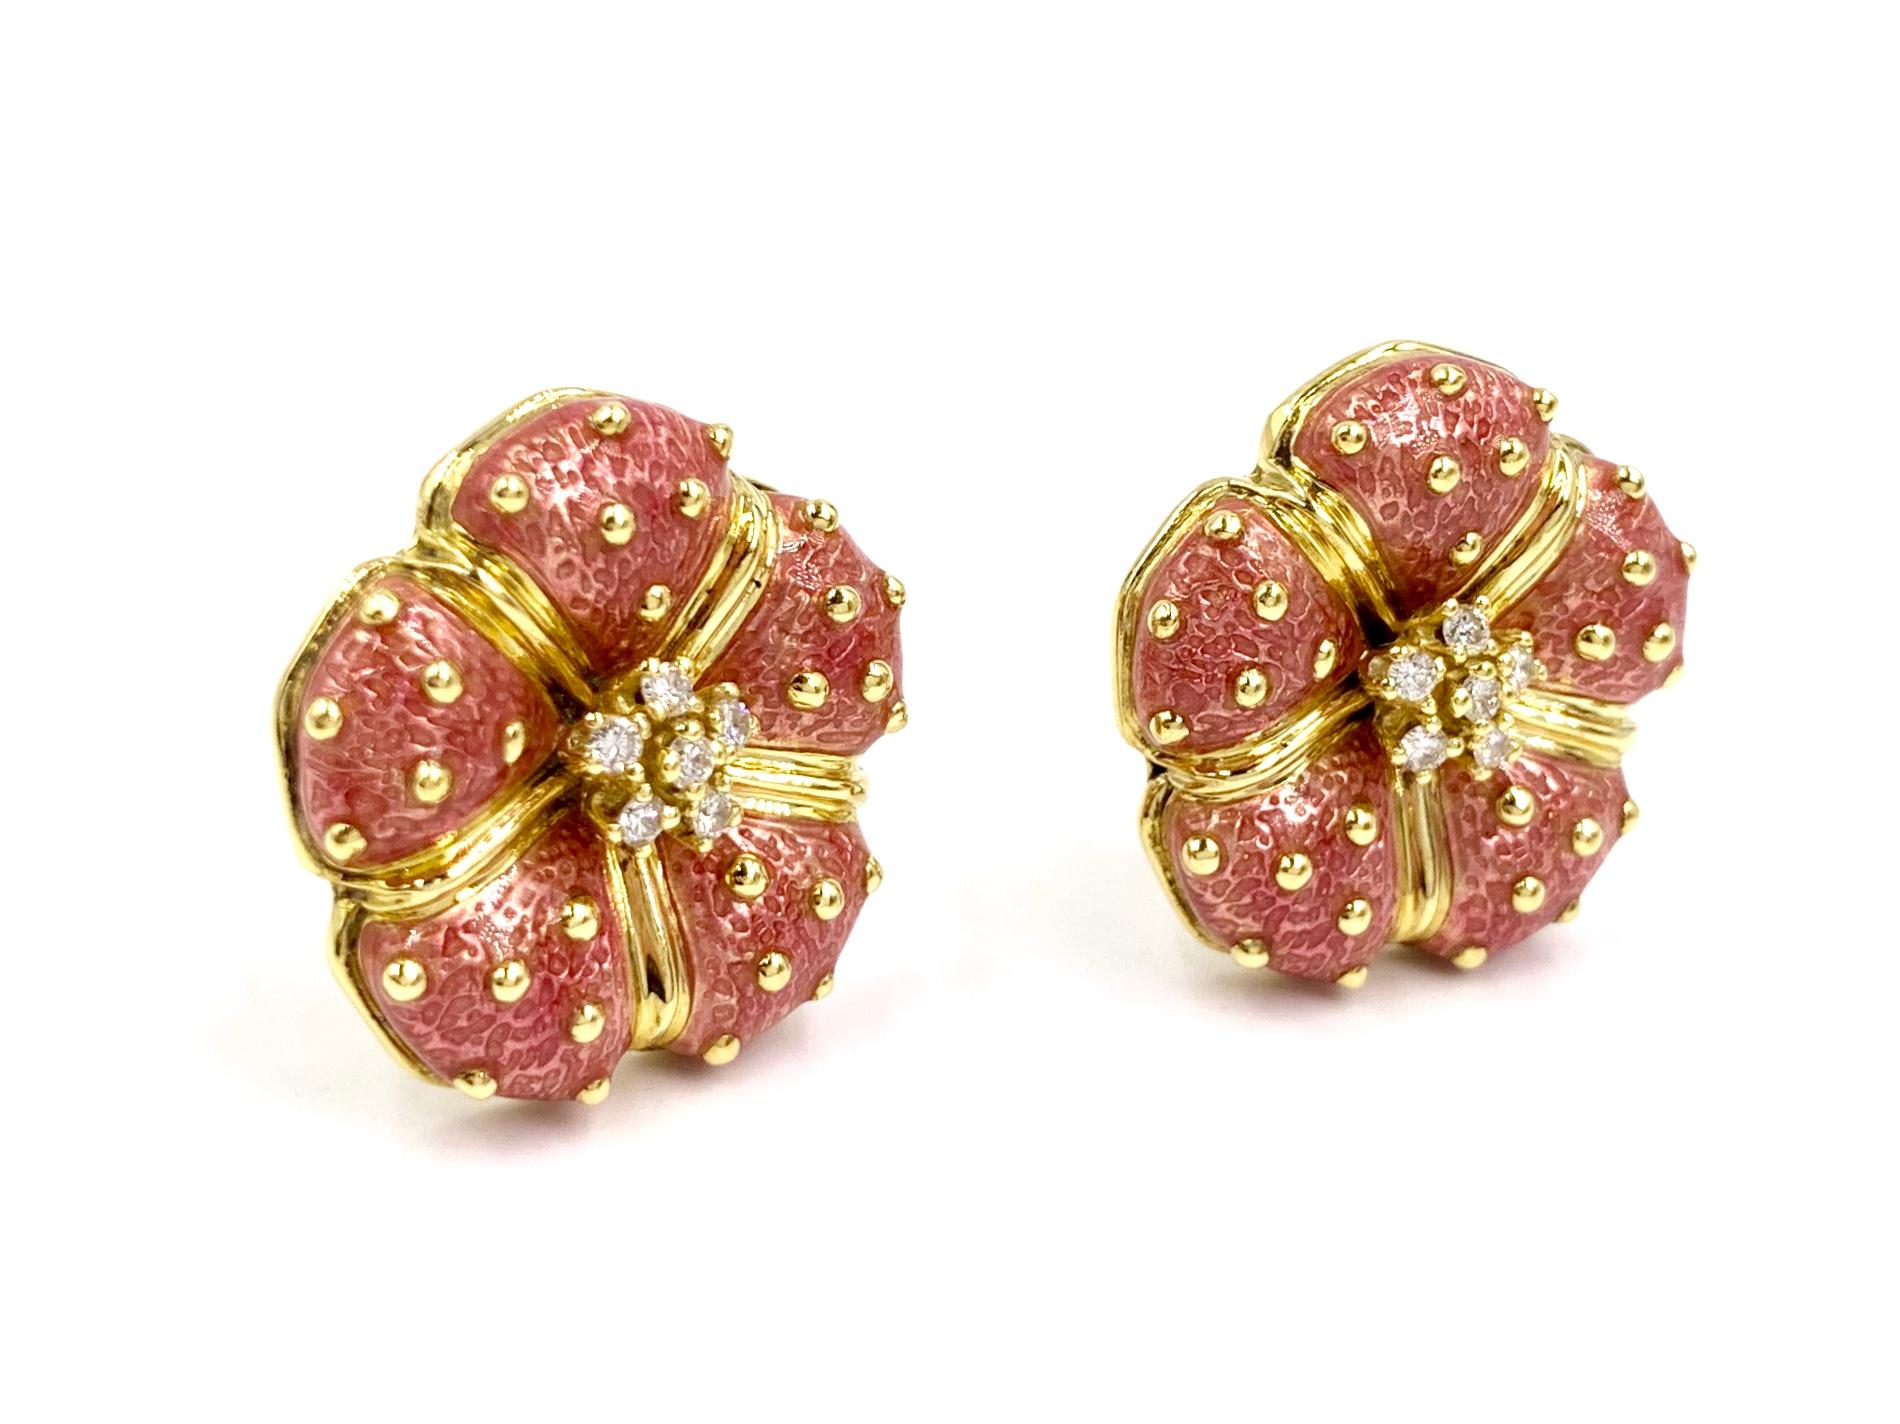 Expertly designed floral earrings by Italian jewelry designer, HIDALGO. These beautiful rose-blush pink enamel flower button earrings feature 6 diamonds in the center of each at .36 carats total weight. Diamond quality is approximately F-G color,